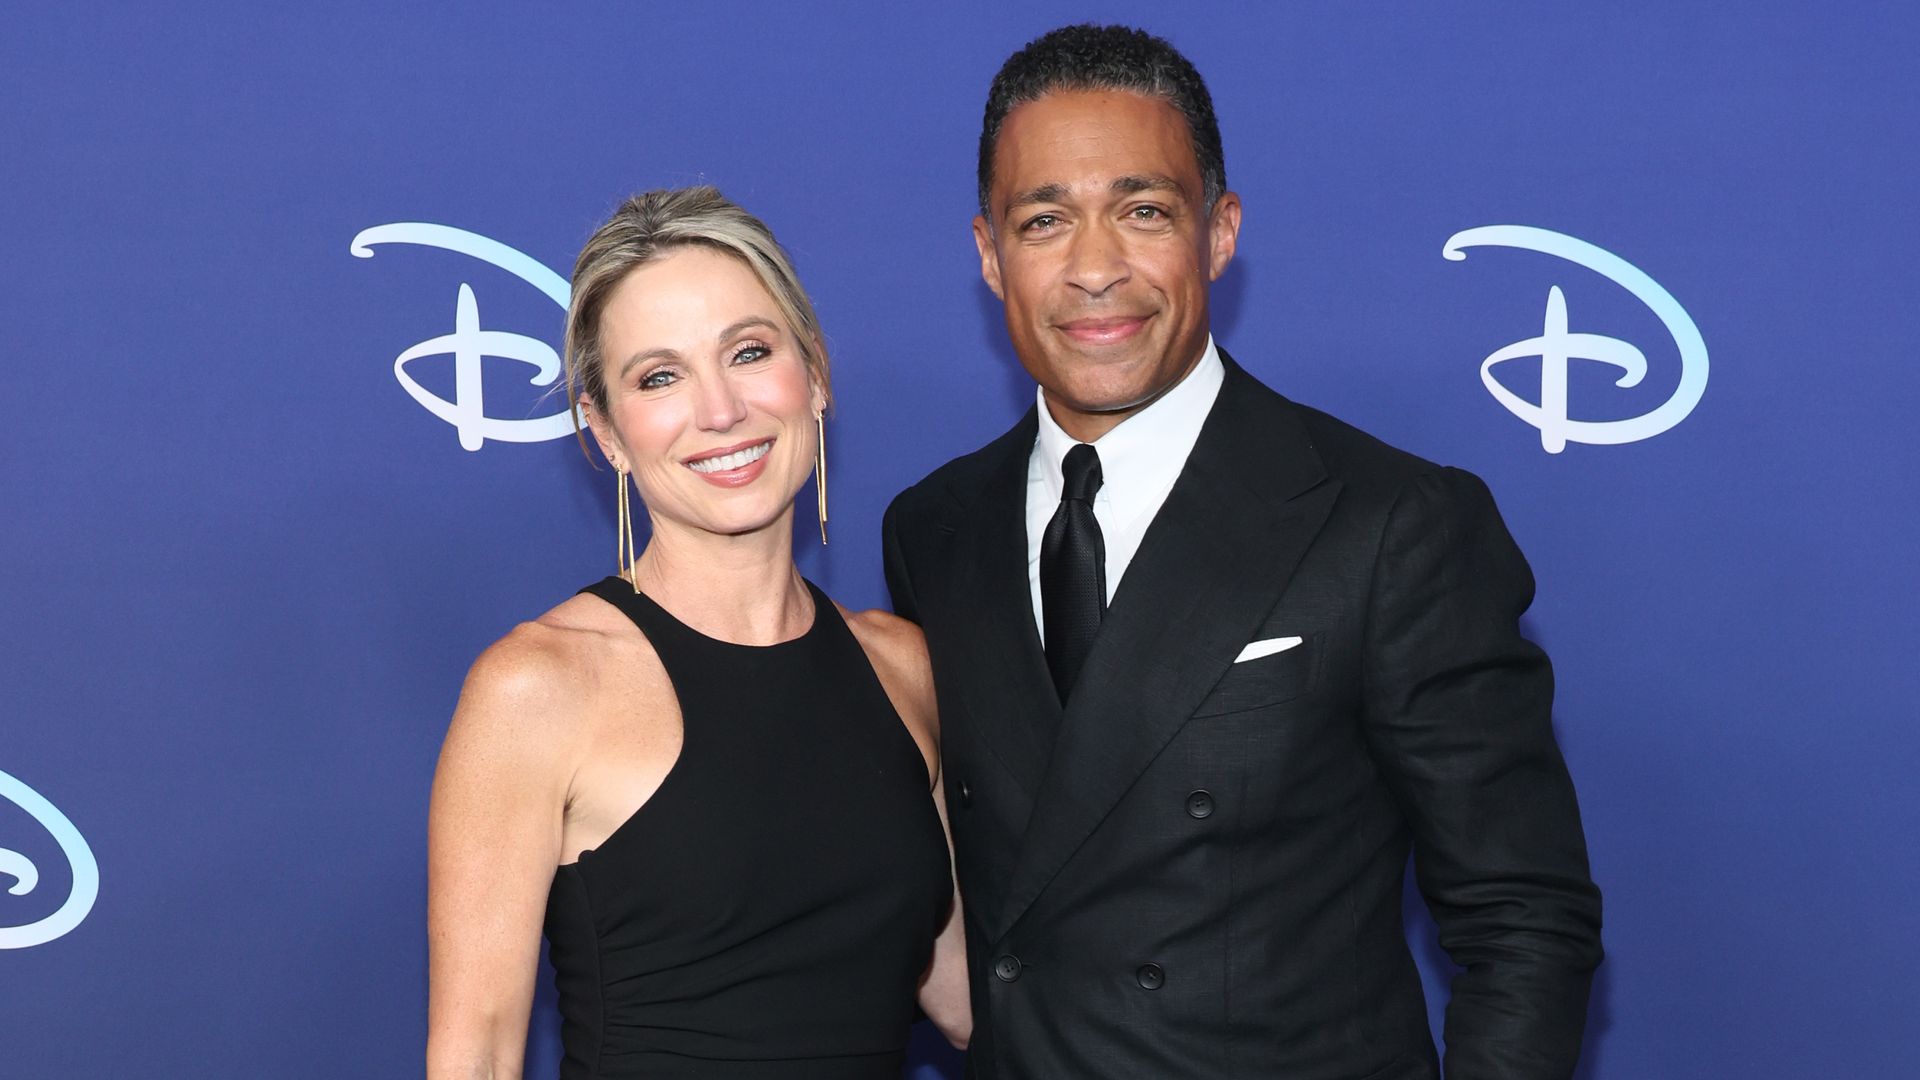 Amy Robach in a black dress and TJ Holmes in a suit